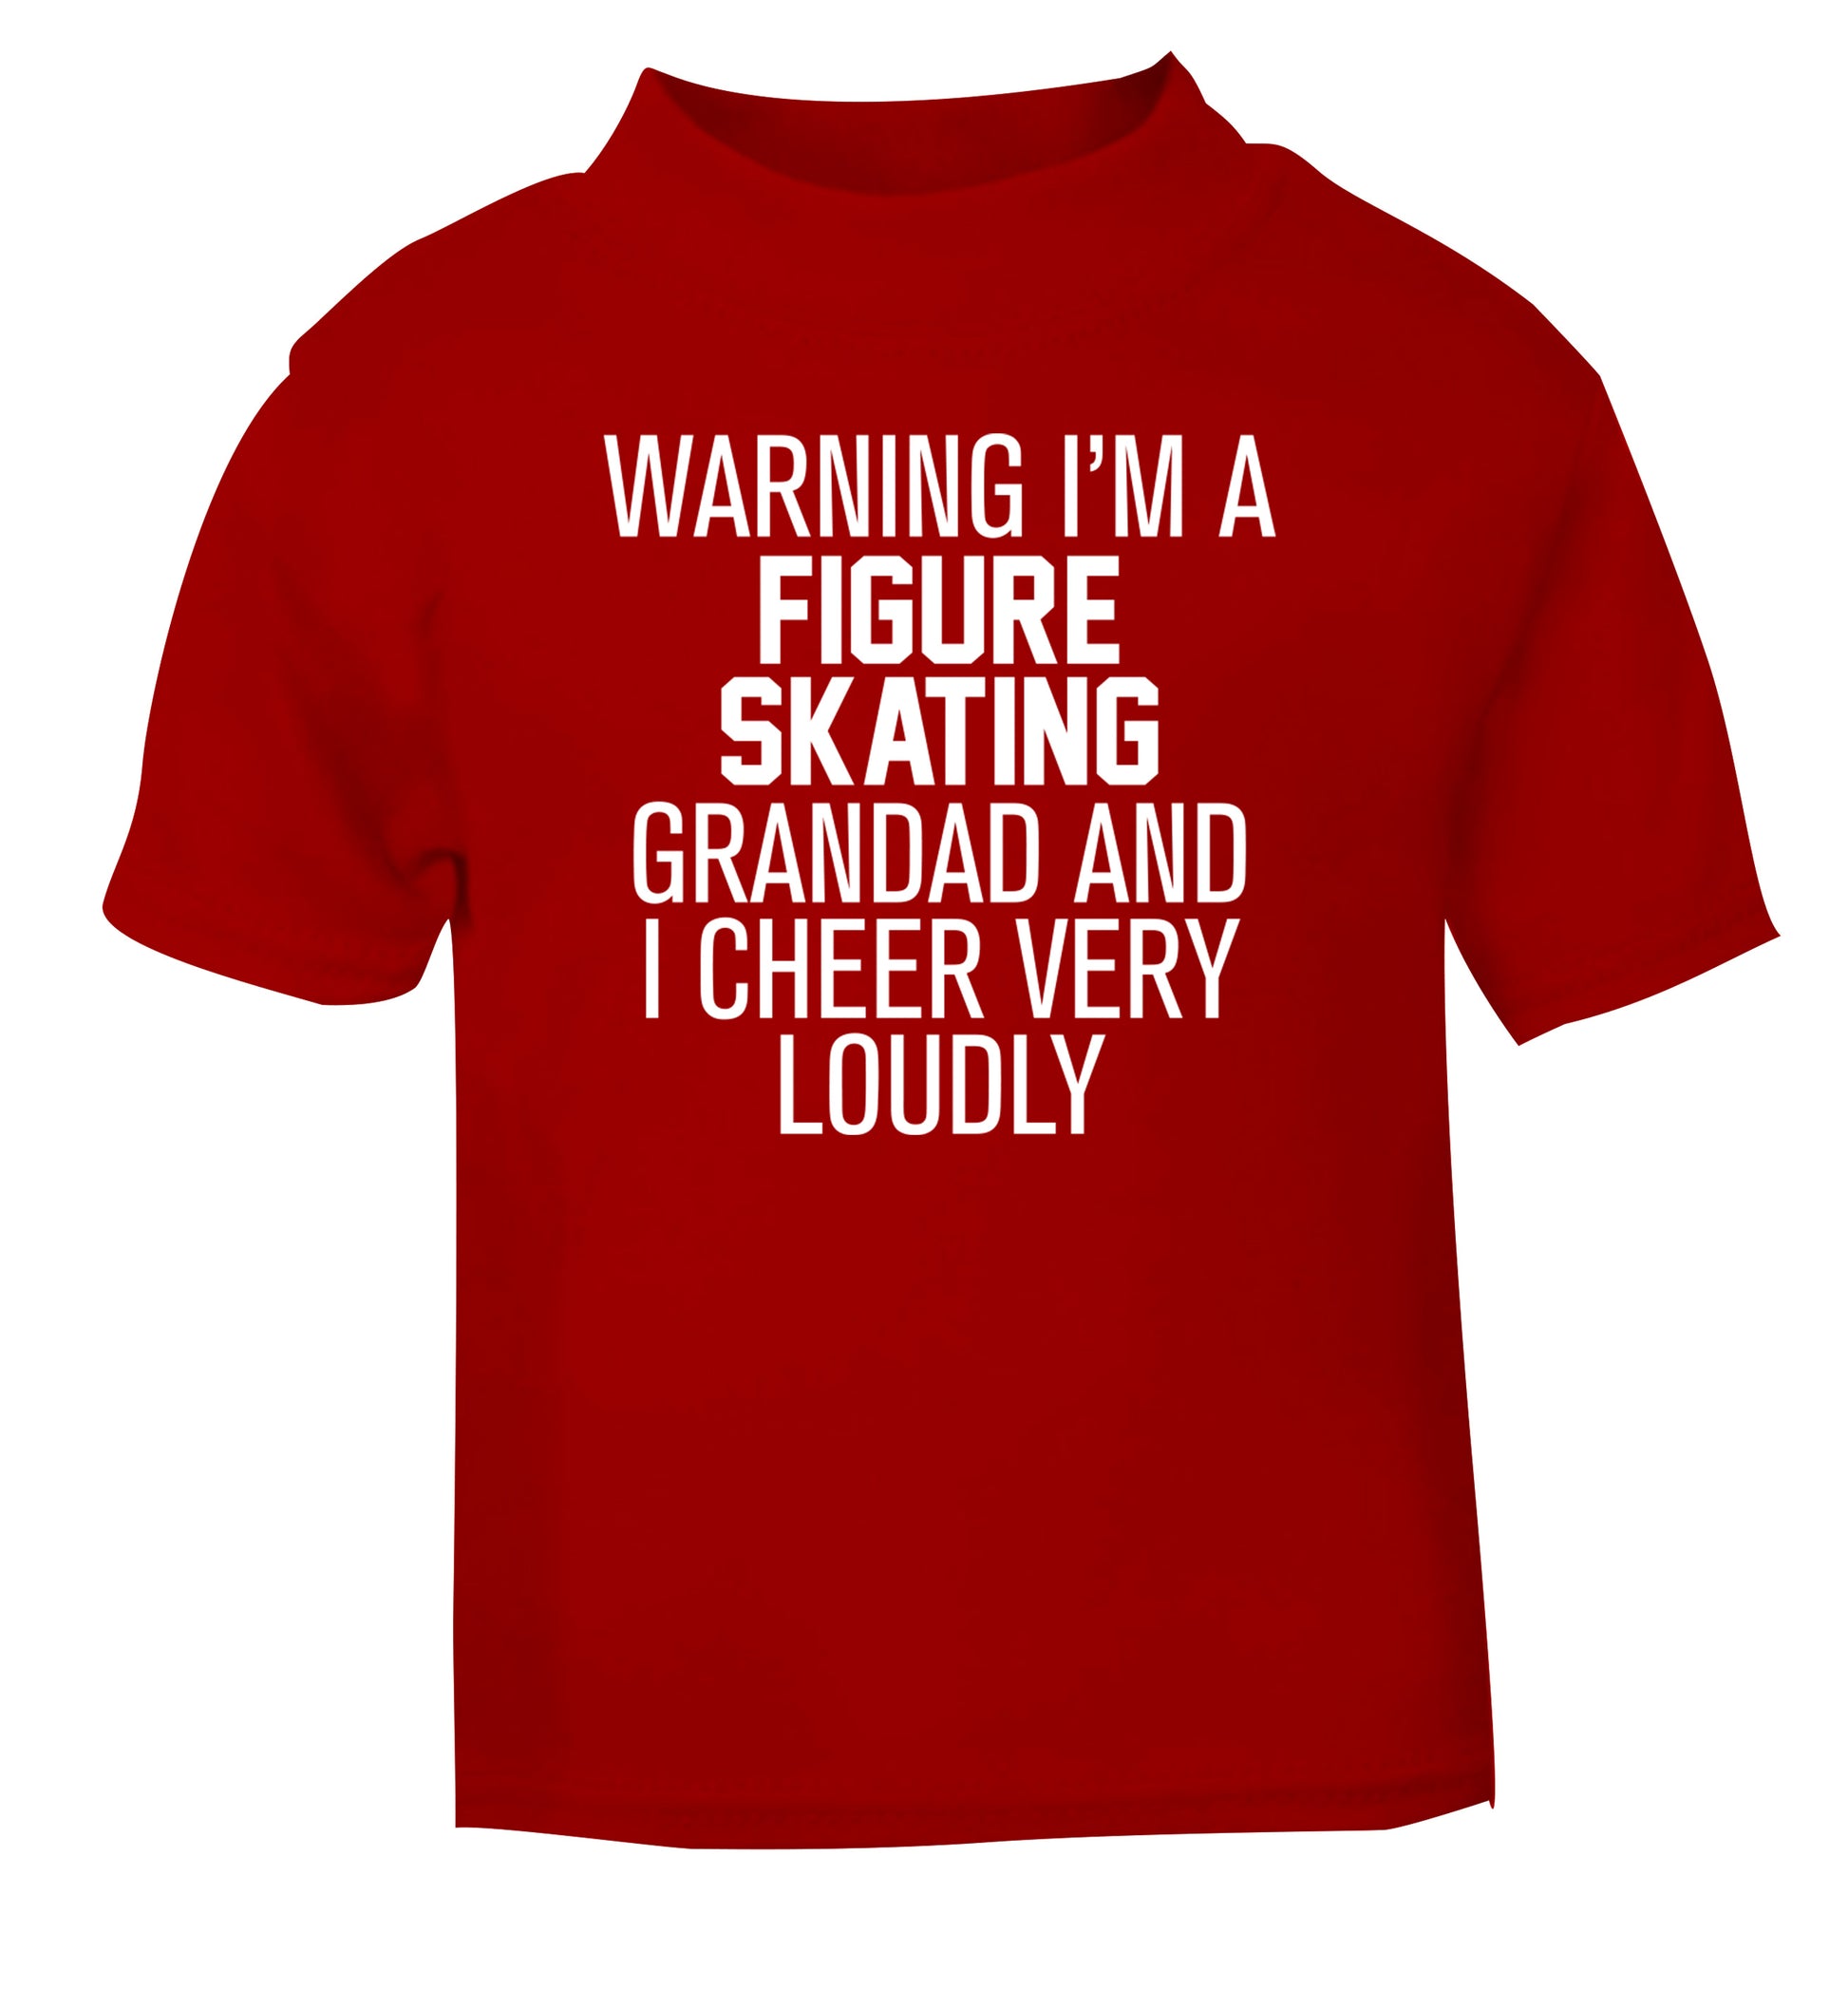 Warning I'm a figure skating grandad and I cheer very loudly red Baby Toddler Tshirt 2 Years